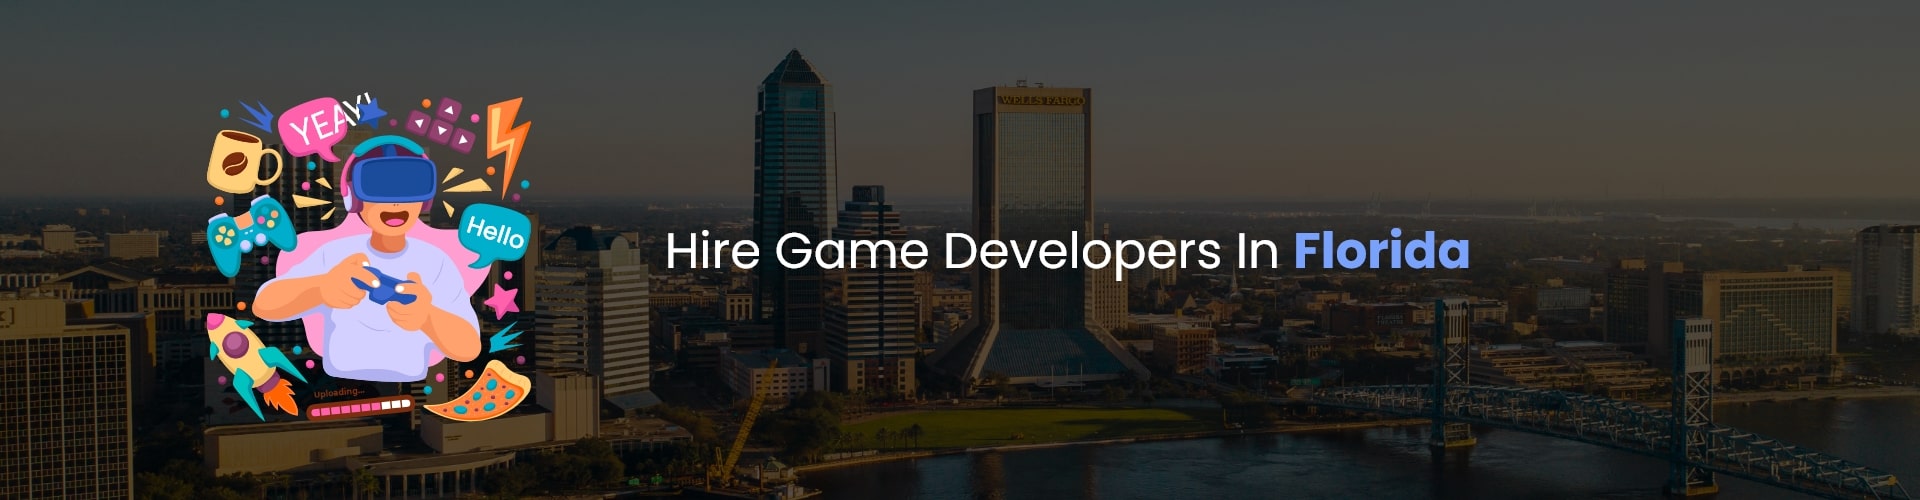 hire game developers in florida